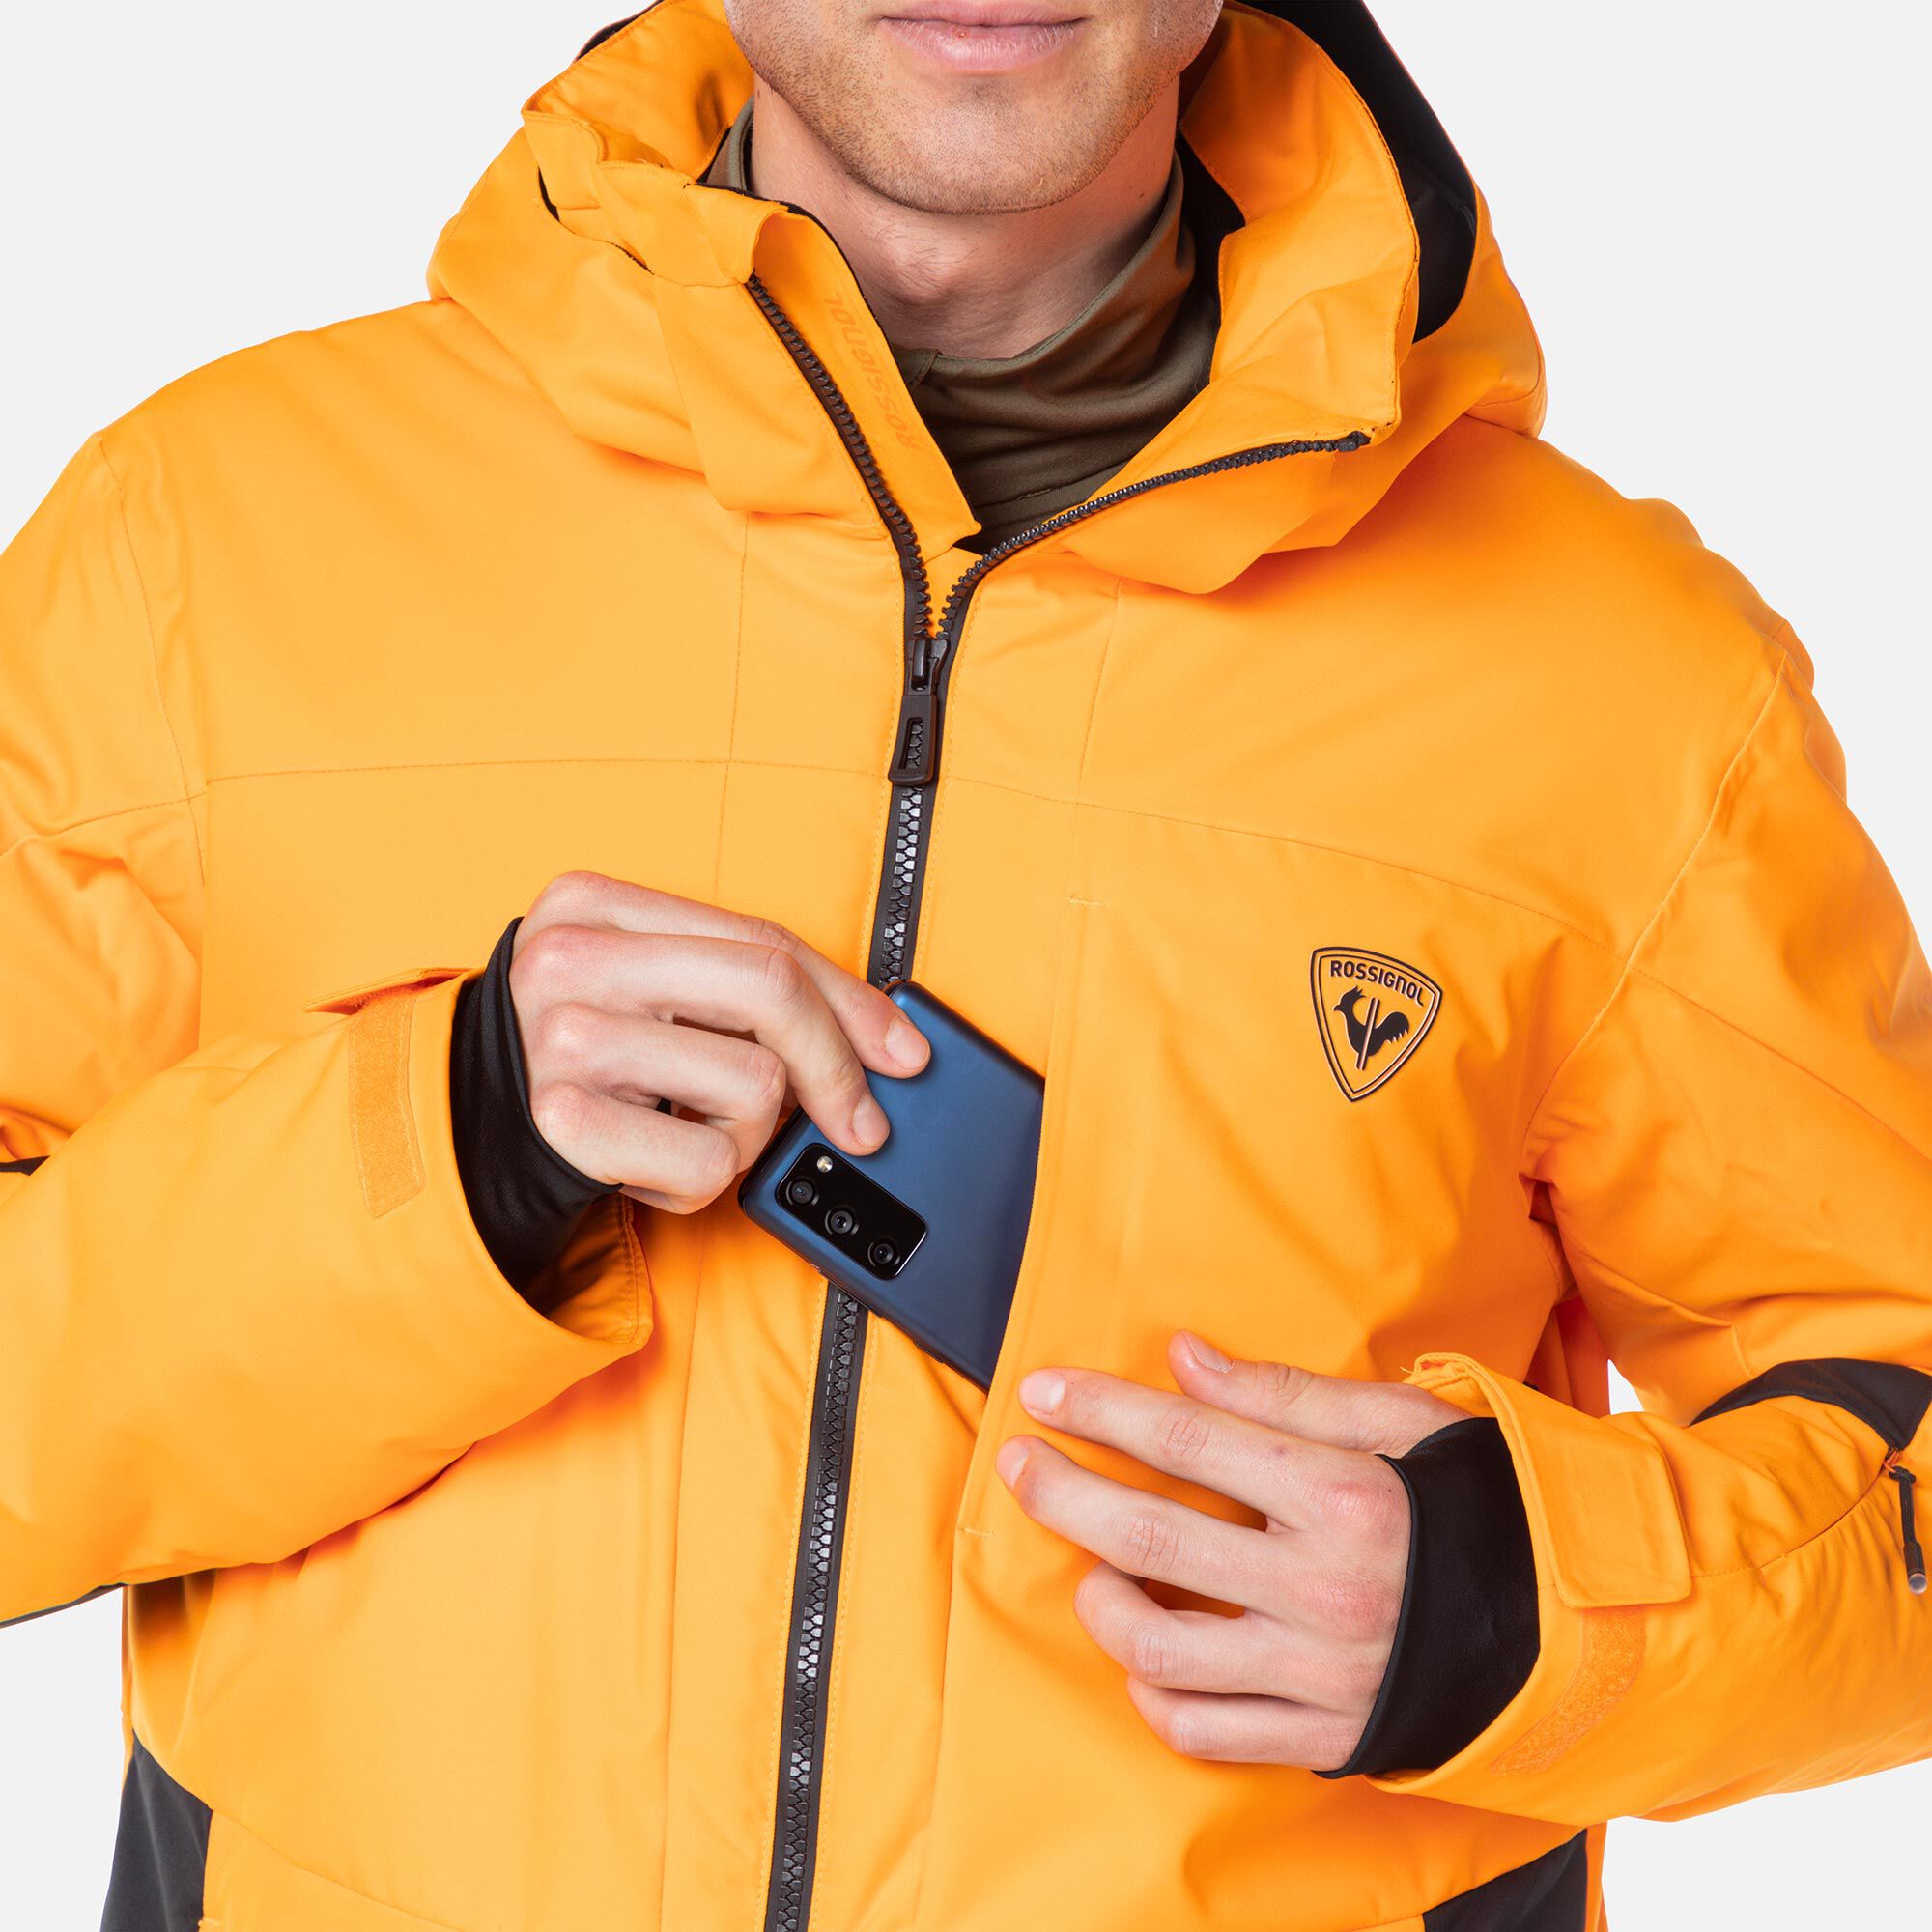 Rossignol logo-patch padded jacket - Yellow